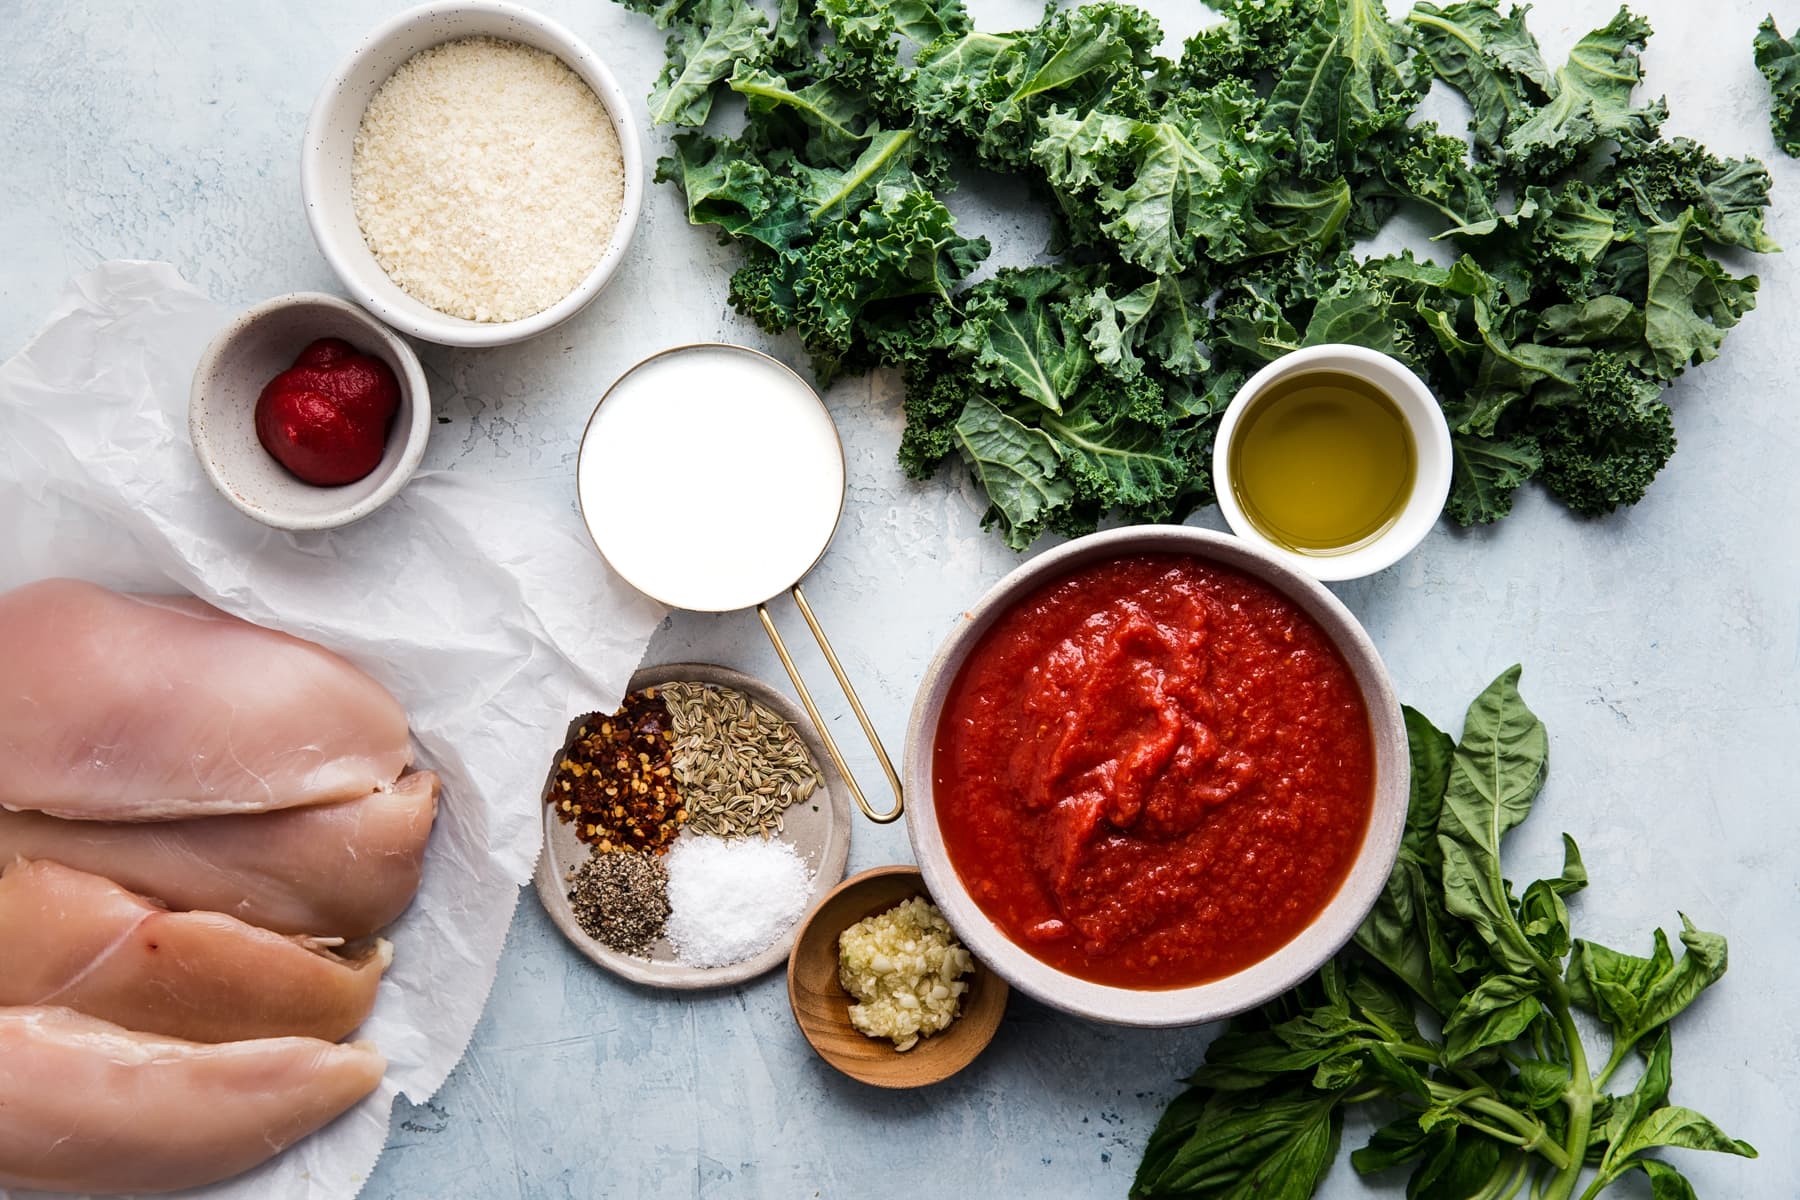 ingredients laid out for Creamy Tomato Chicken Skillet Dinner cream, tomato paste, kale and basil